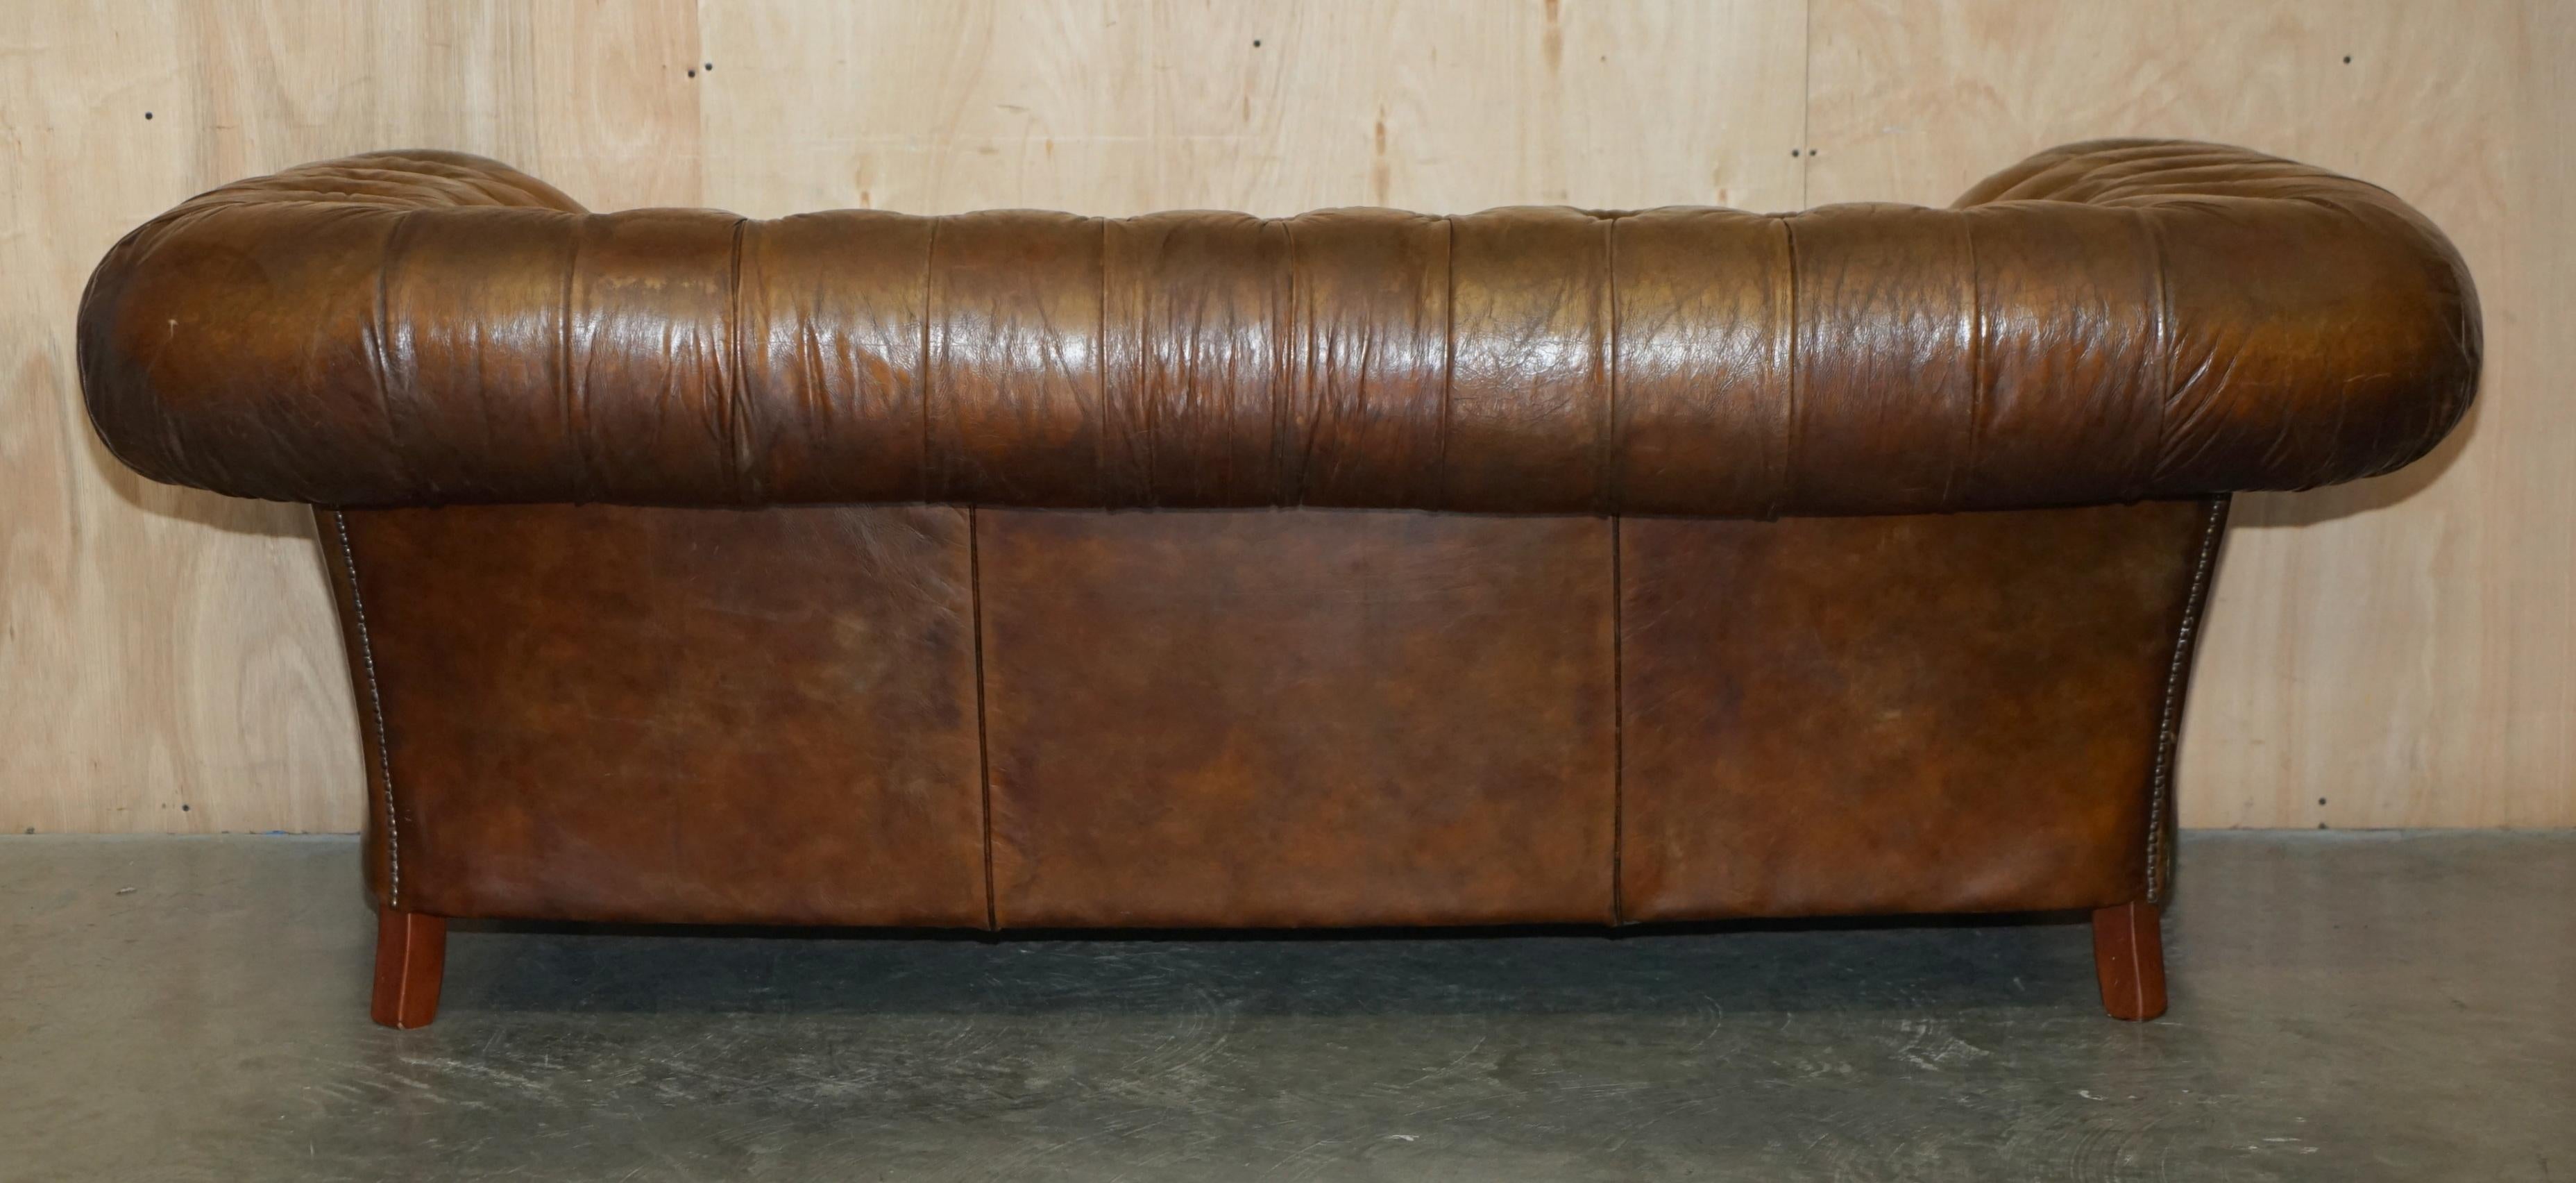 1 OF 2 TIMOTHY OULTON HERiTAGE BROWN VINTAGE LEATHER CHESTERFIELD HALO SOFAS For Sale 30